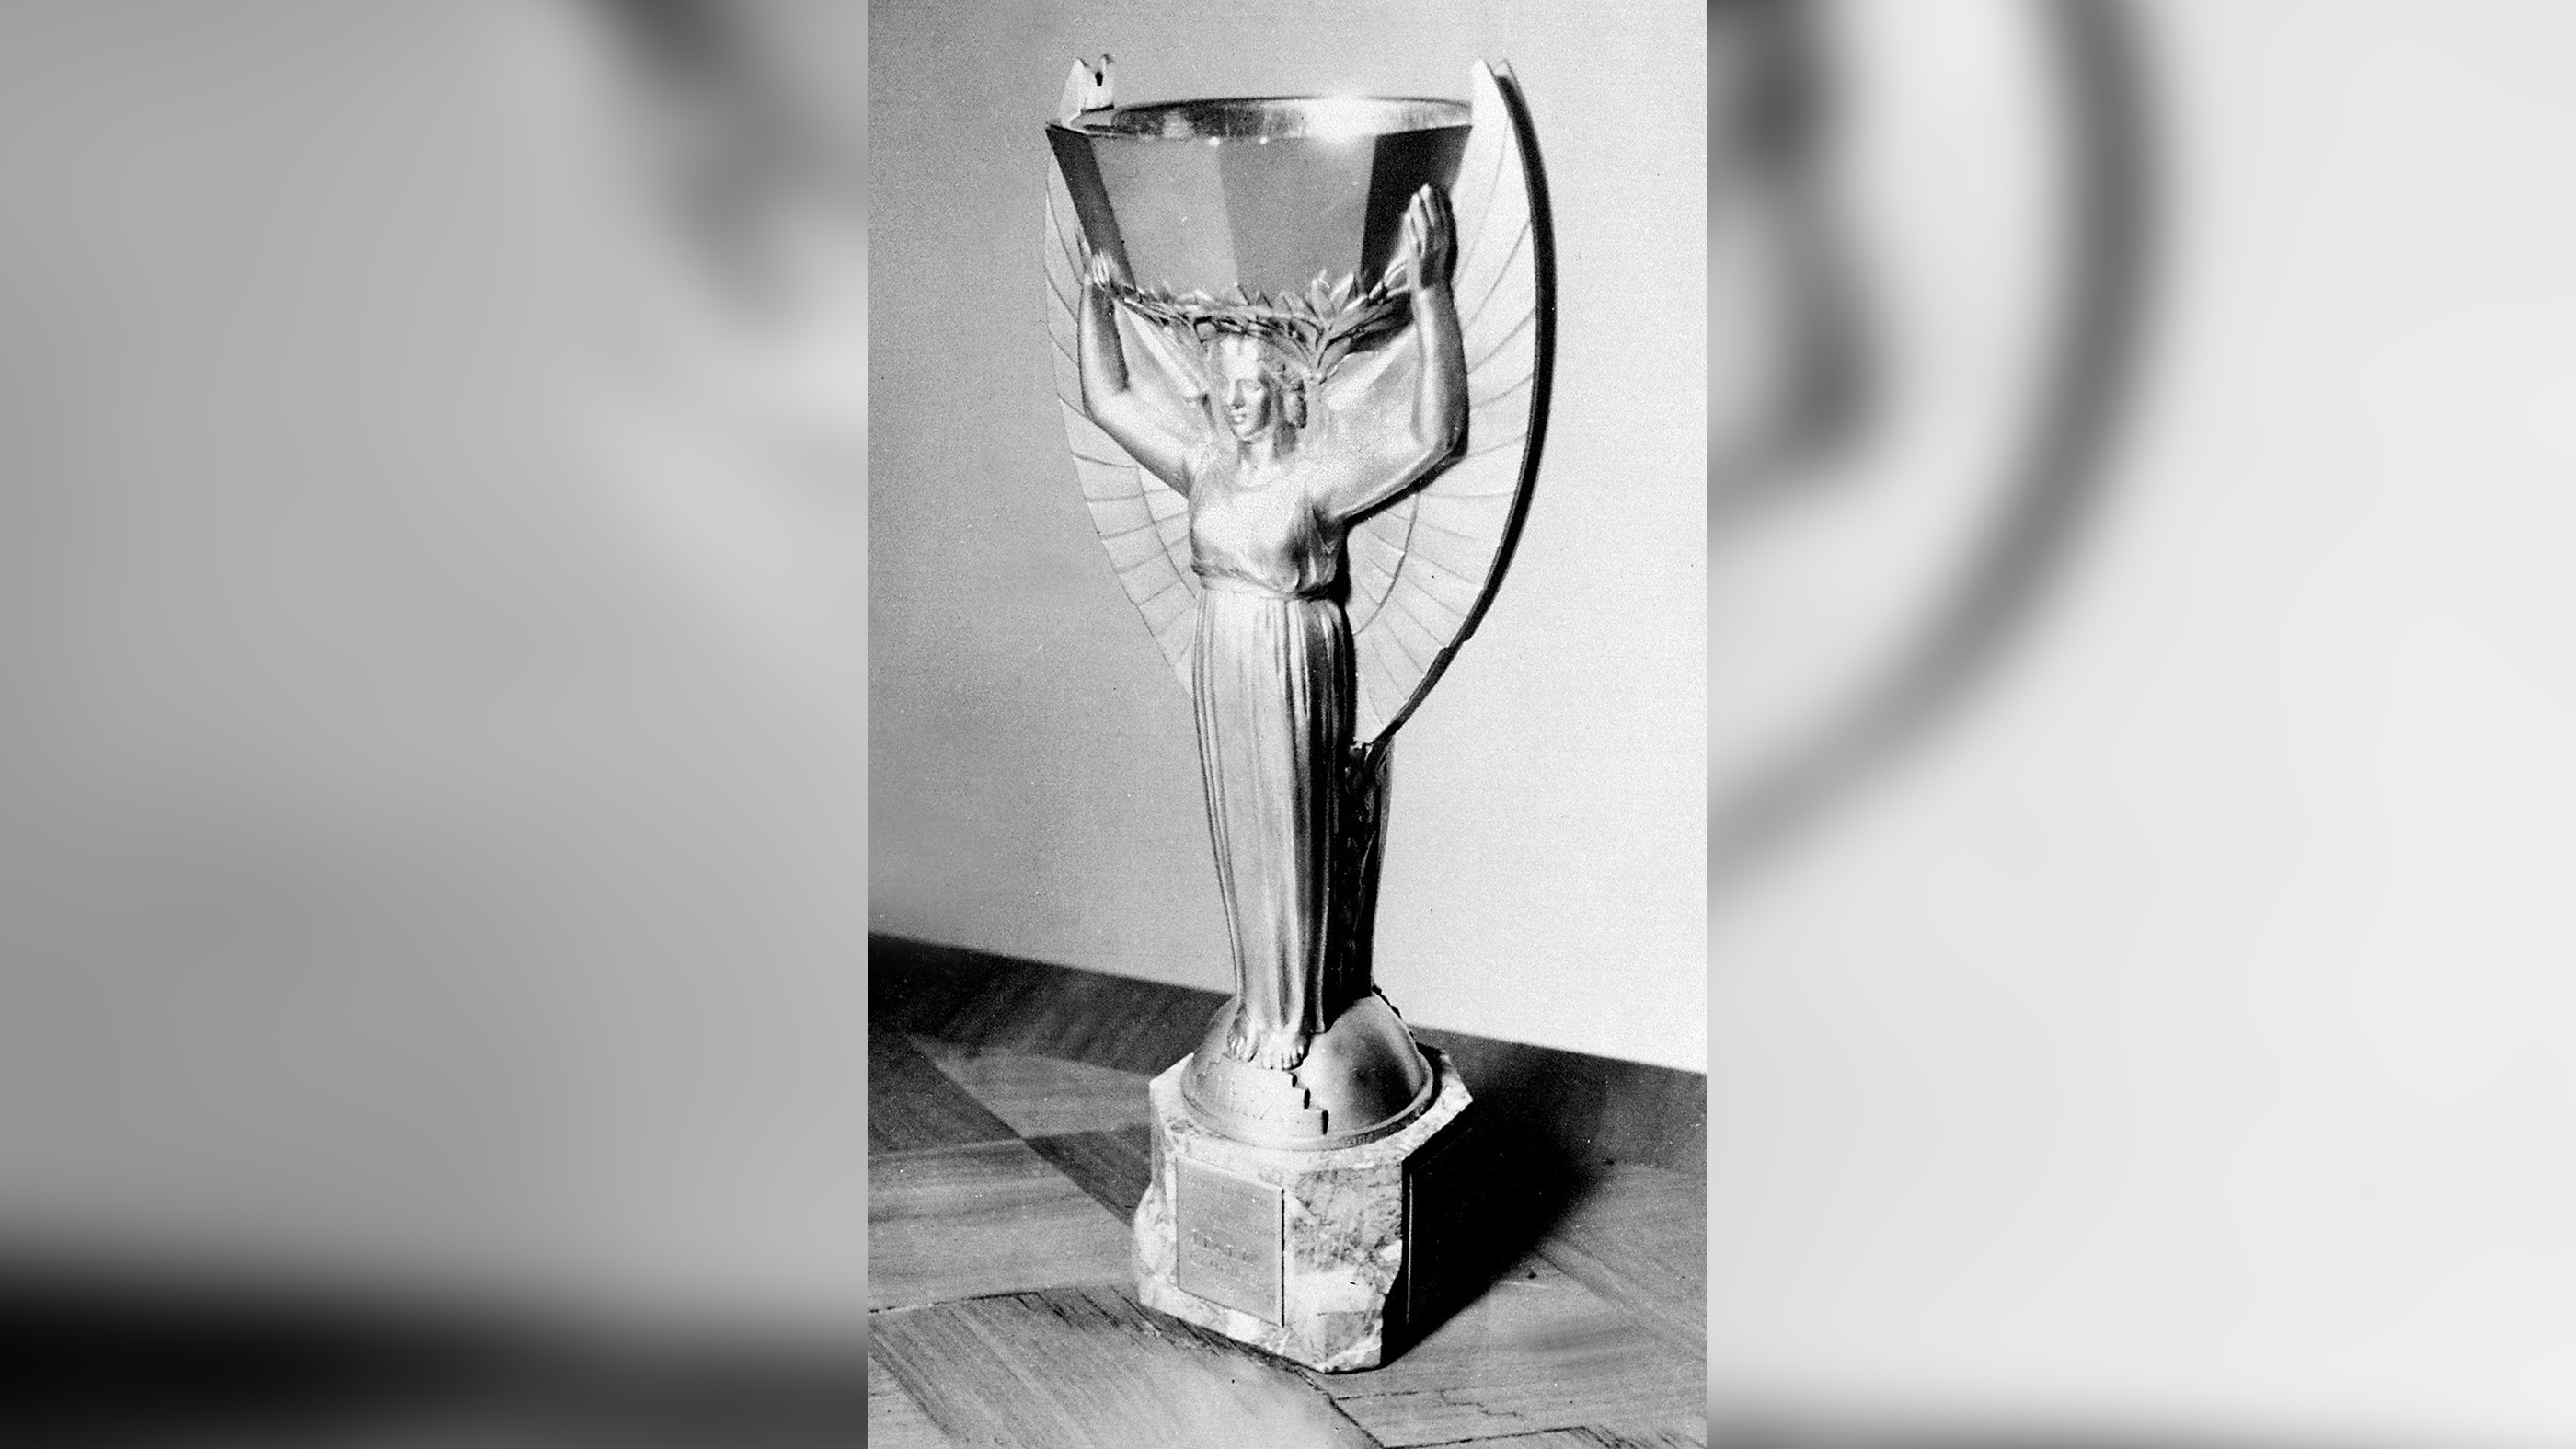 Created by French sculptor Abel Lafleur, the solid-gold statuette called the Jules Rimet Cup was given to the captain of the winning World Cup soccer team. Int 1970, the Jules Rimet Cup became the permanent property of Brazil after its third World Cup victory in Mexico.